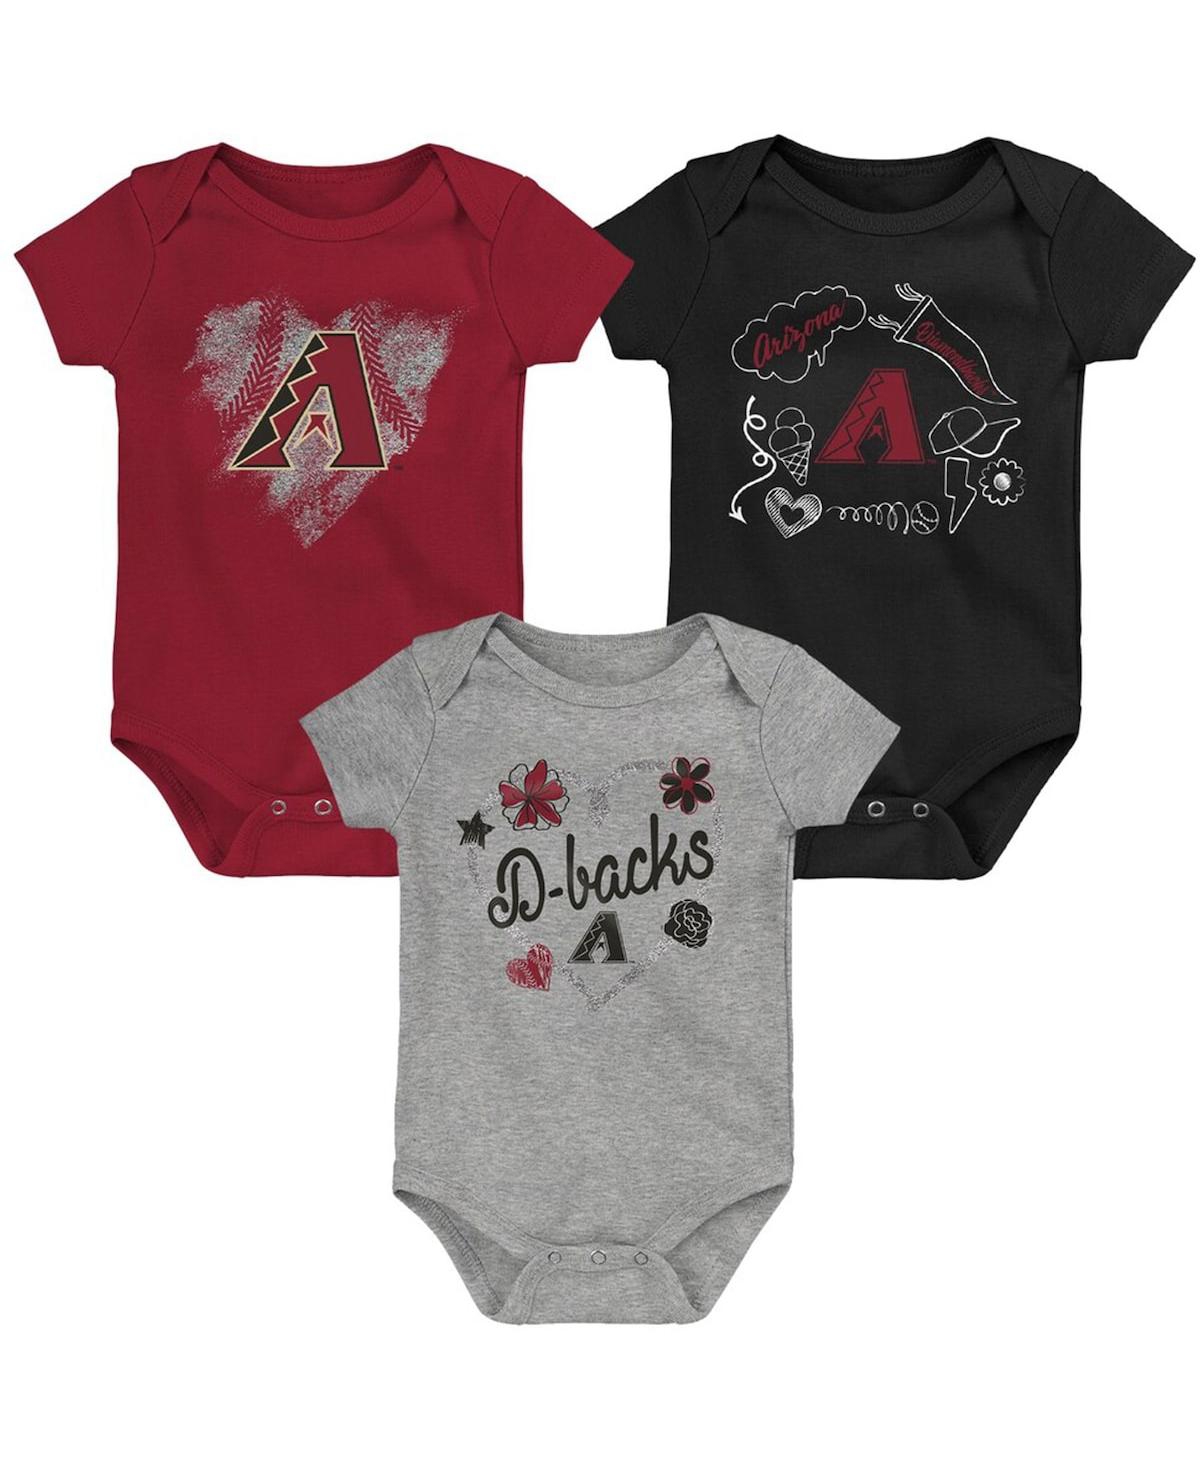 Outerstuff Babies' Infant Boys And Girls Red And Black And Gray Arizona Diamondbacks Batter Up 3-pack Bodysuit Set In Red,black,gray